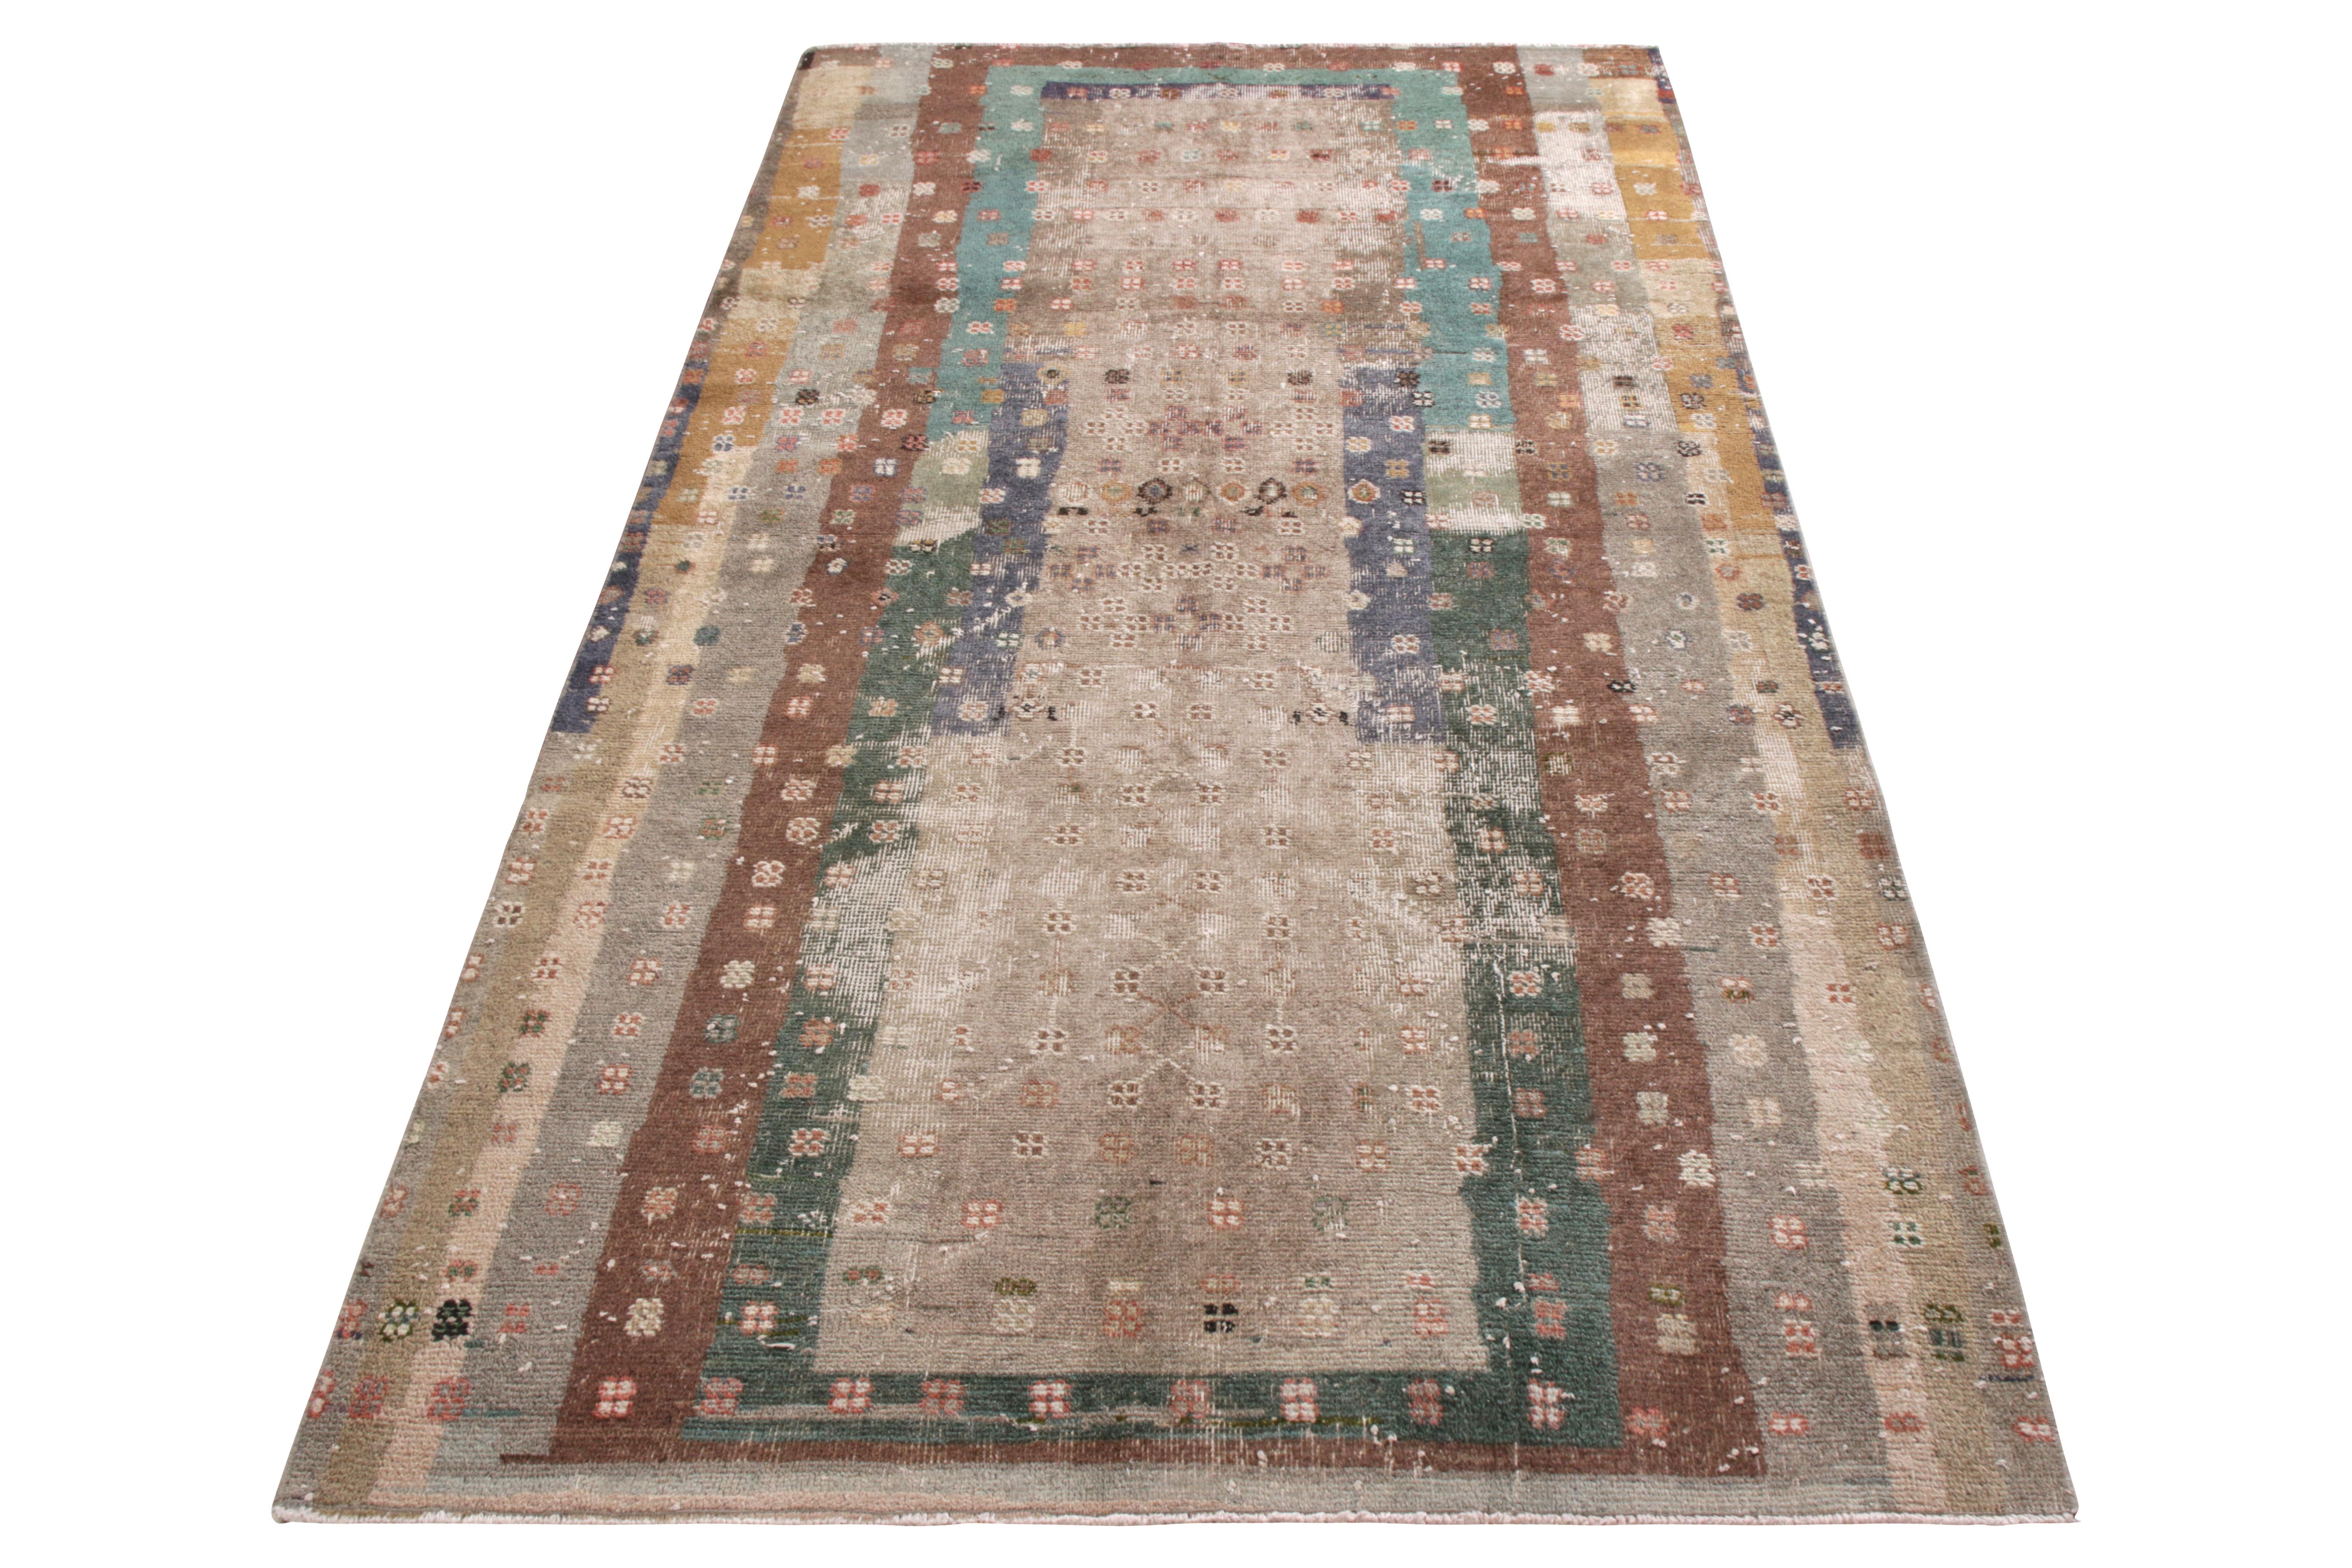 A 4 x 8 vintage rug in distressed boho-chic quality, hand knotted in wool originating from Turkey circa 1950-1960. Enjoying multicolor geometry against beige-brown hues in a portrait invoking playful abstraction and distinction underfoot.